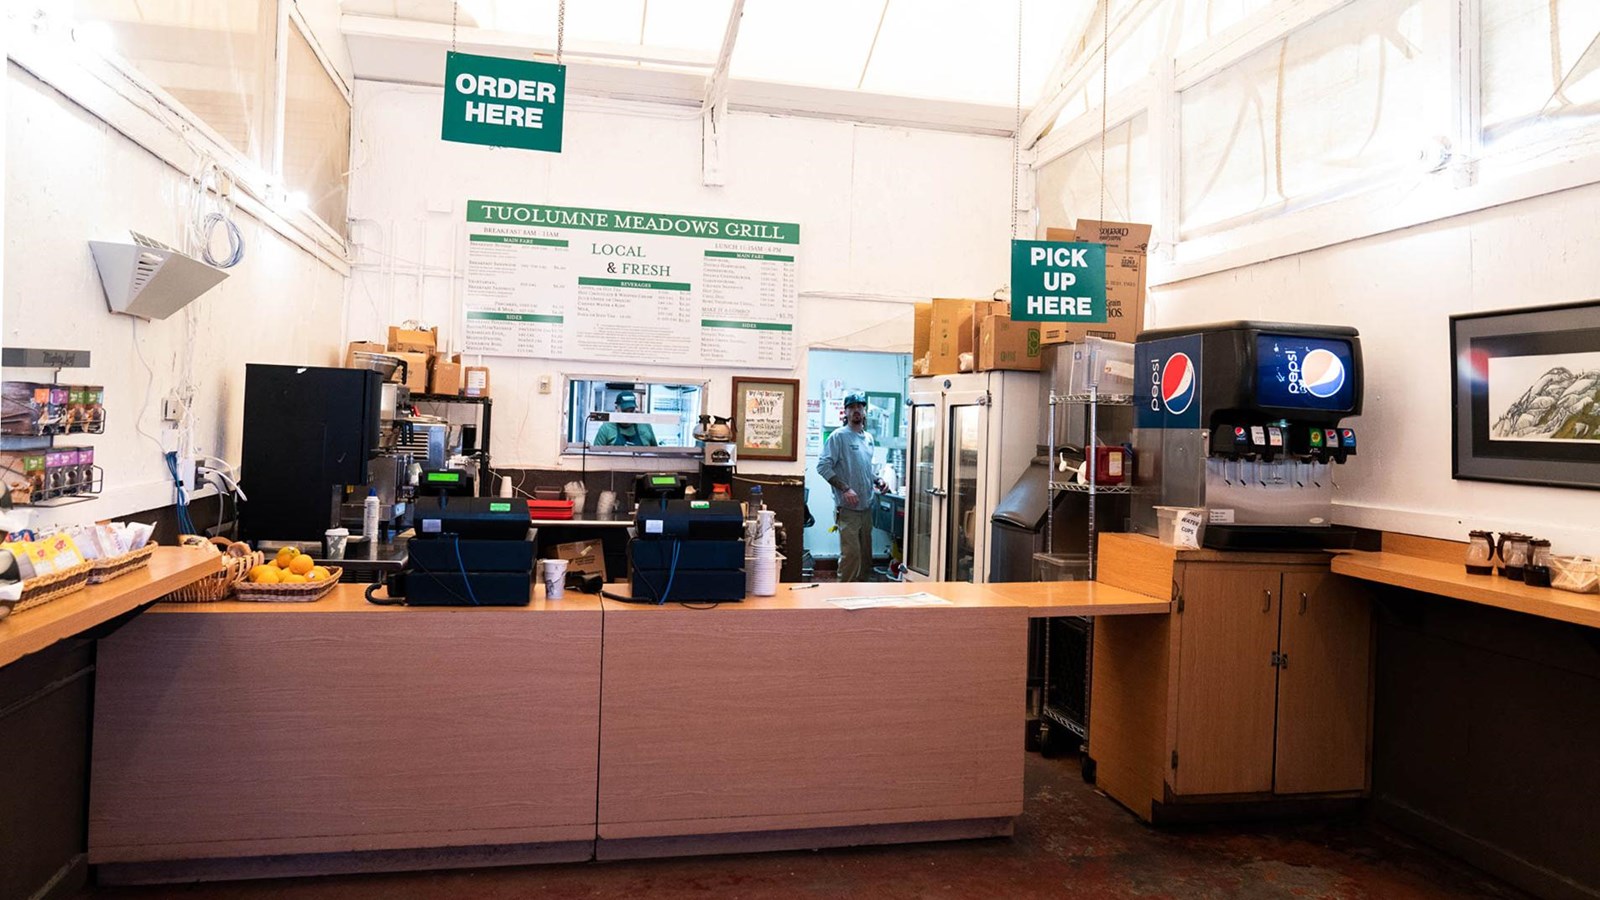 Interior counters and ordering station of the Tuolumne Meadows Grill